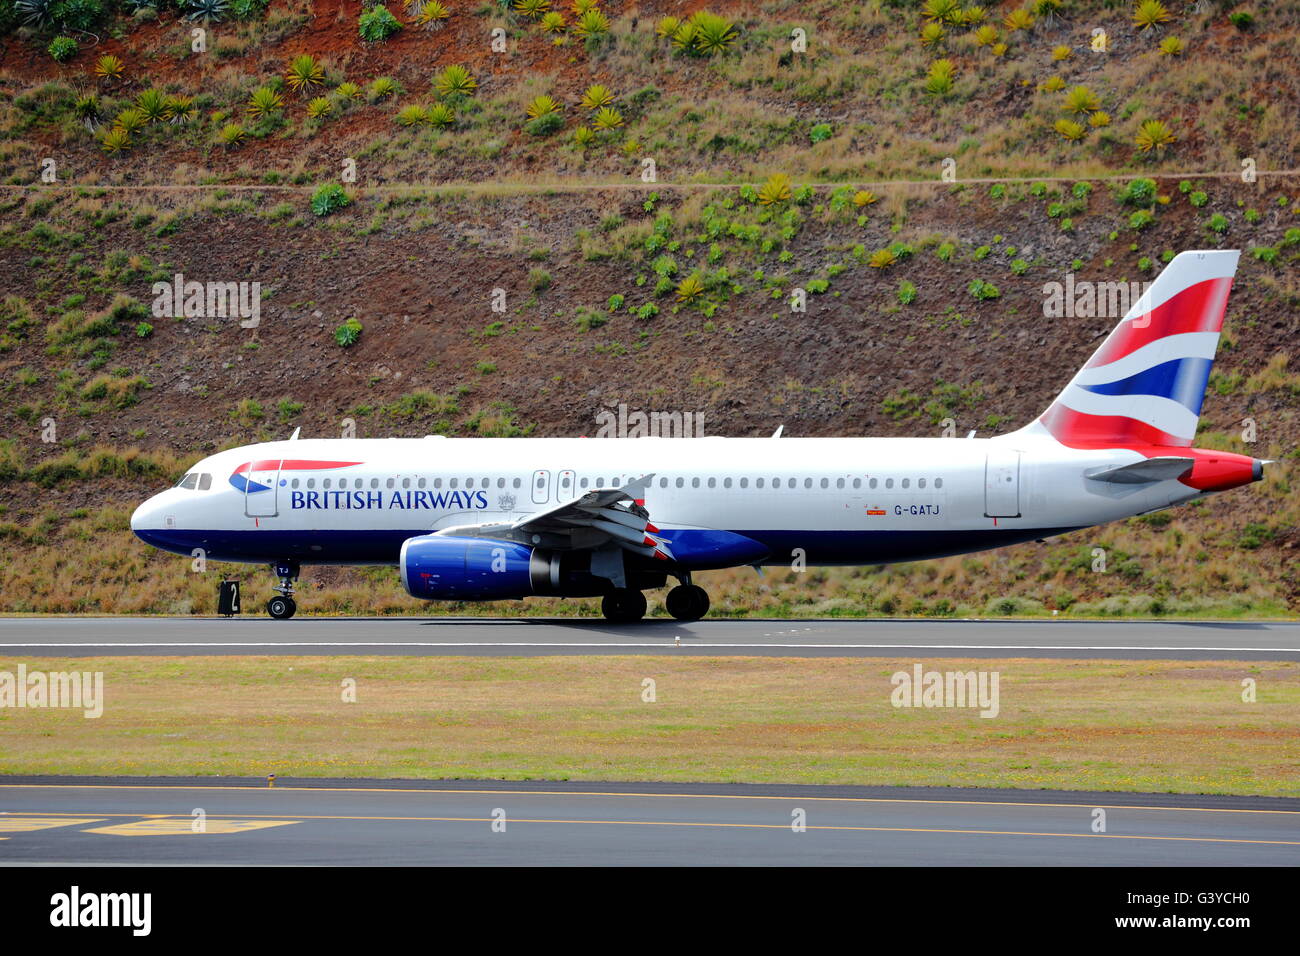 British Airways Airbus A320-200 G-GATJ arriving at Funchal Airport, Madeira, Portugal Stock Photo